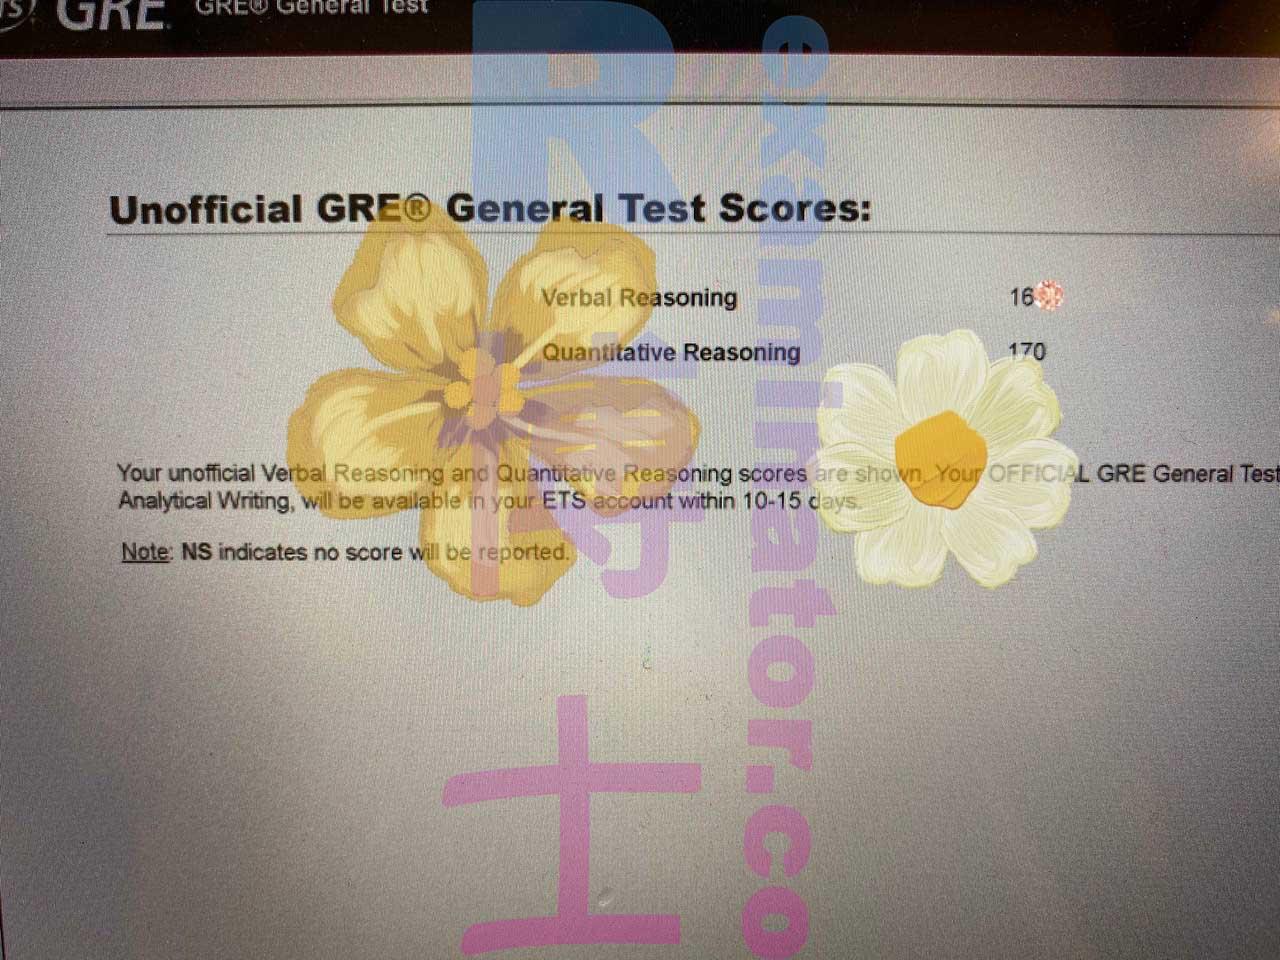 score image for GRE Proxy Testing success story #316